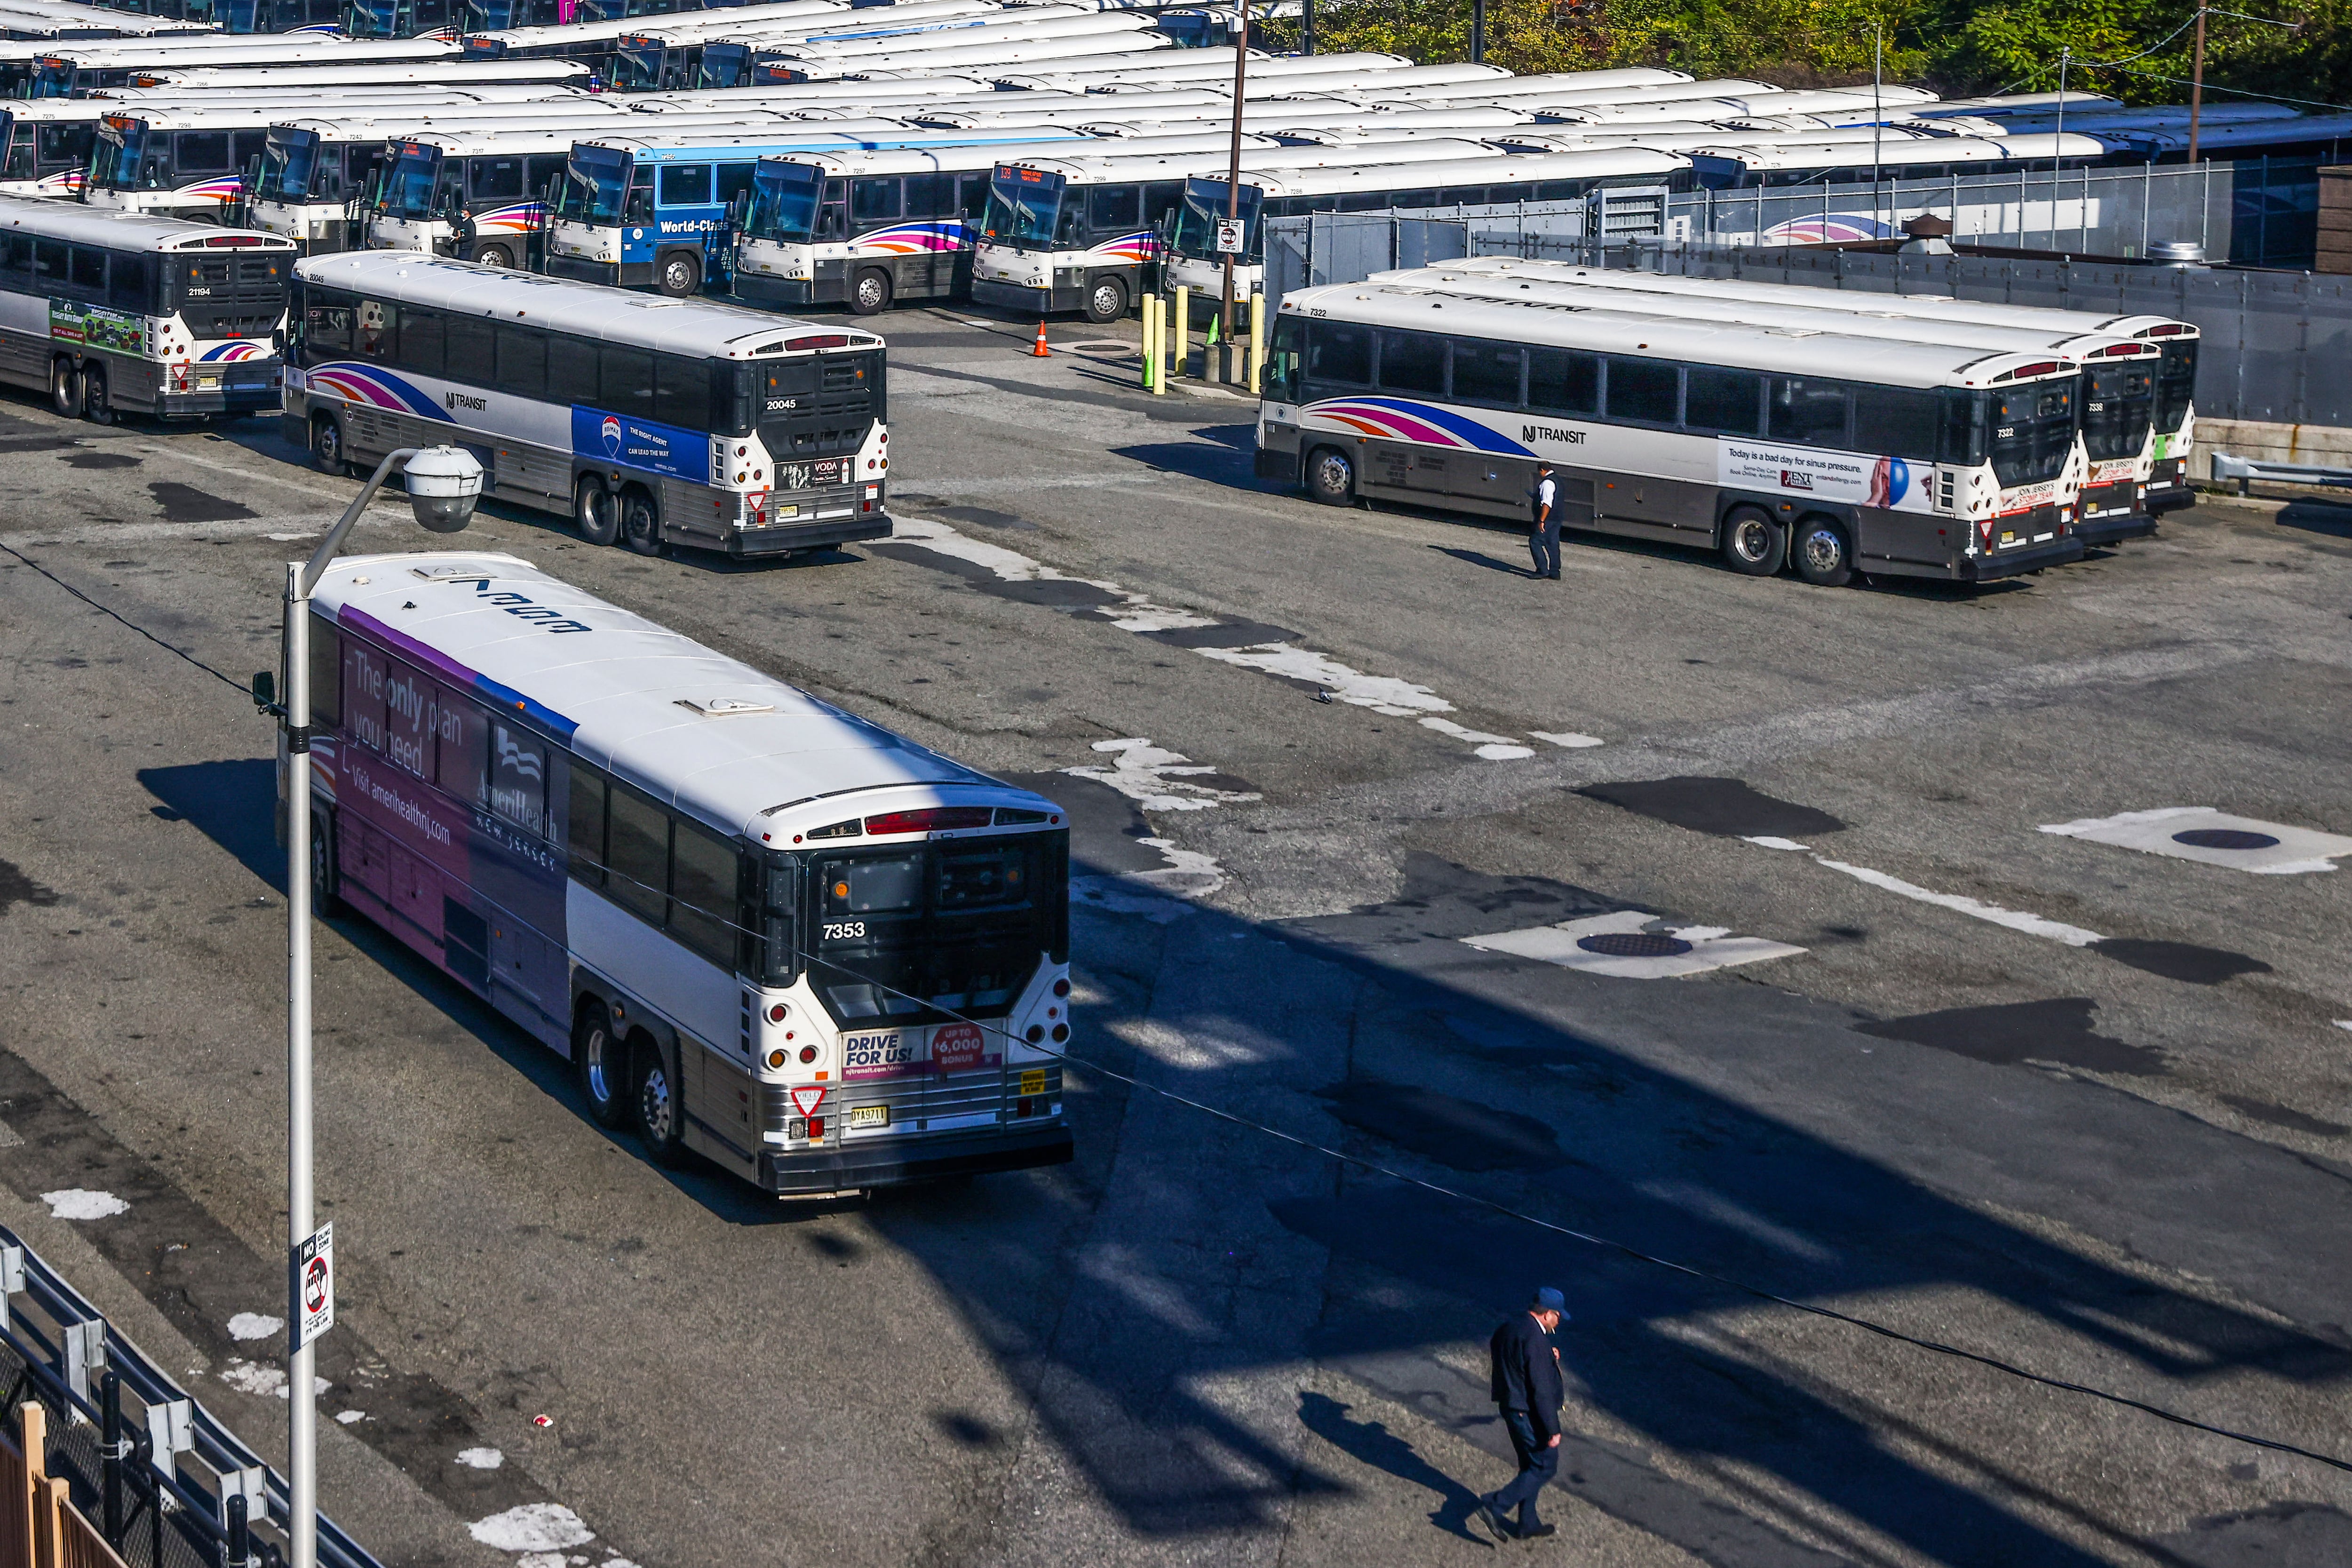 Busses are parked inside a bus station in Jersey City, New Jersey, 